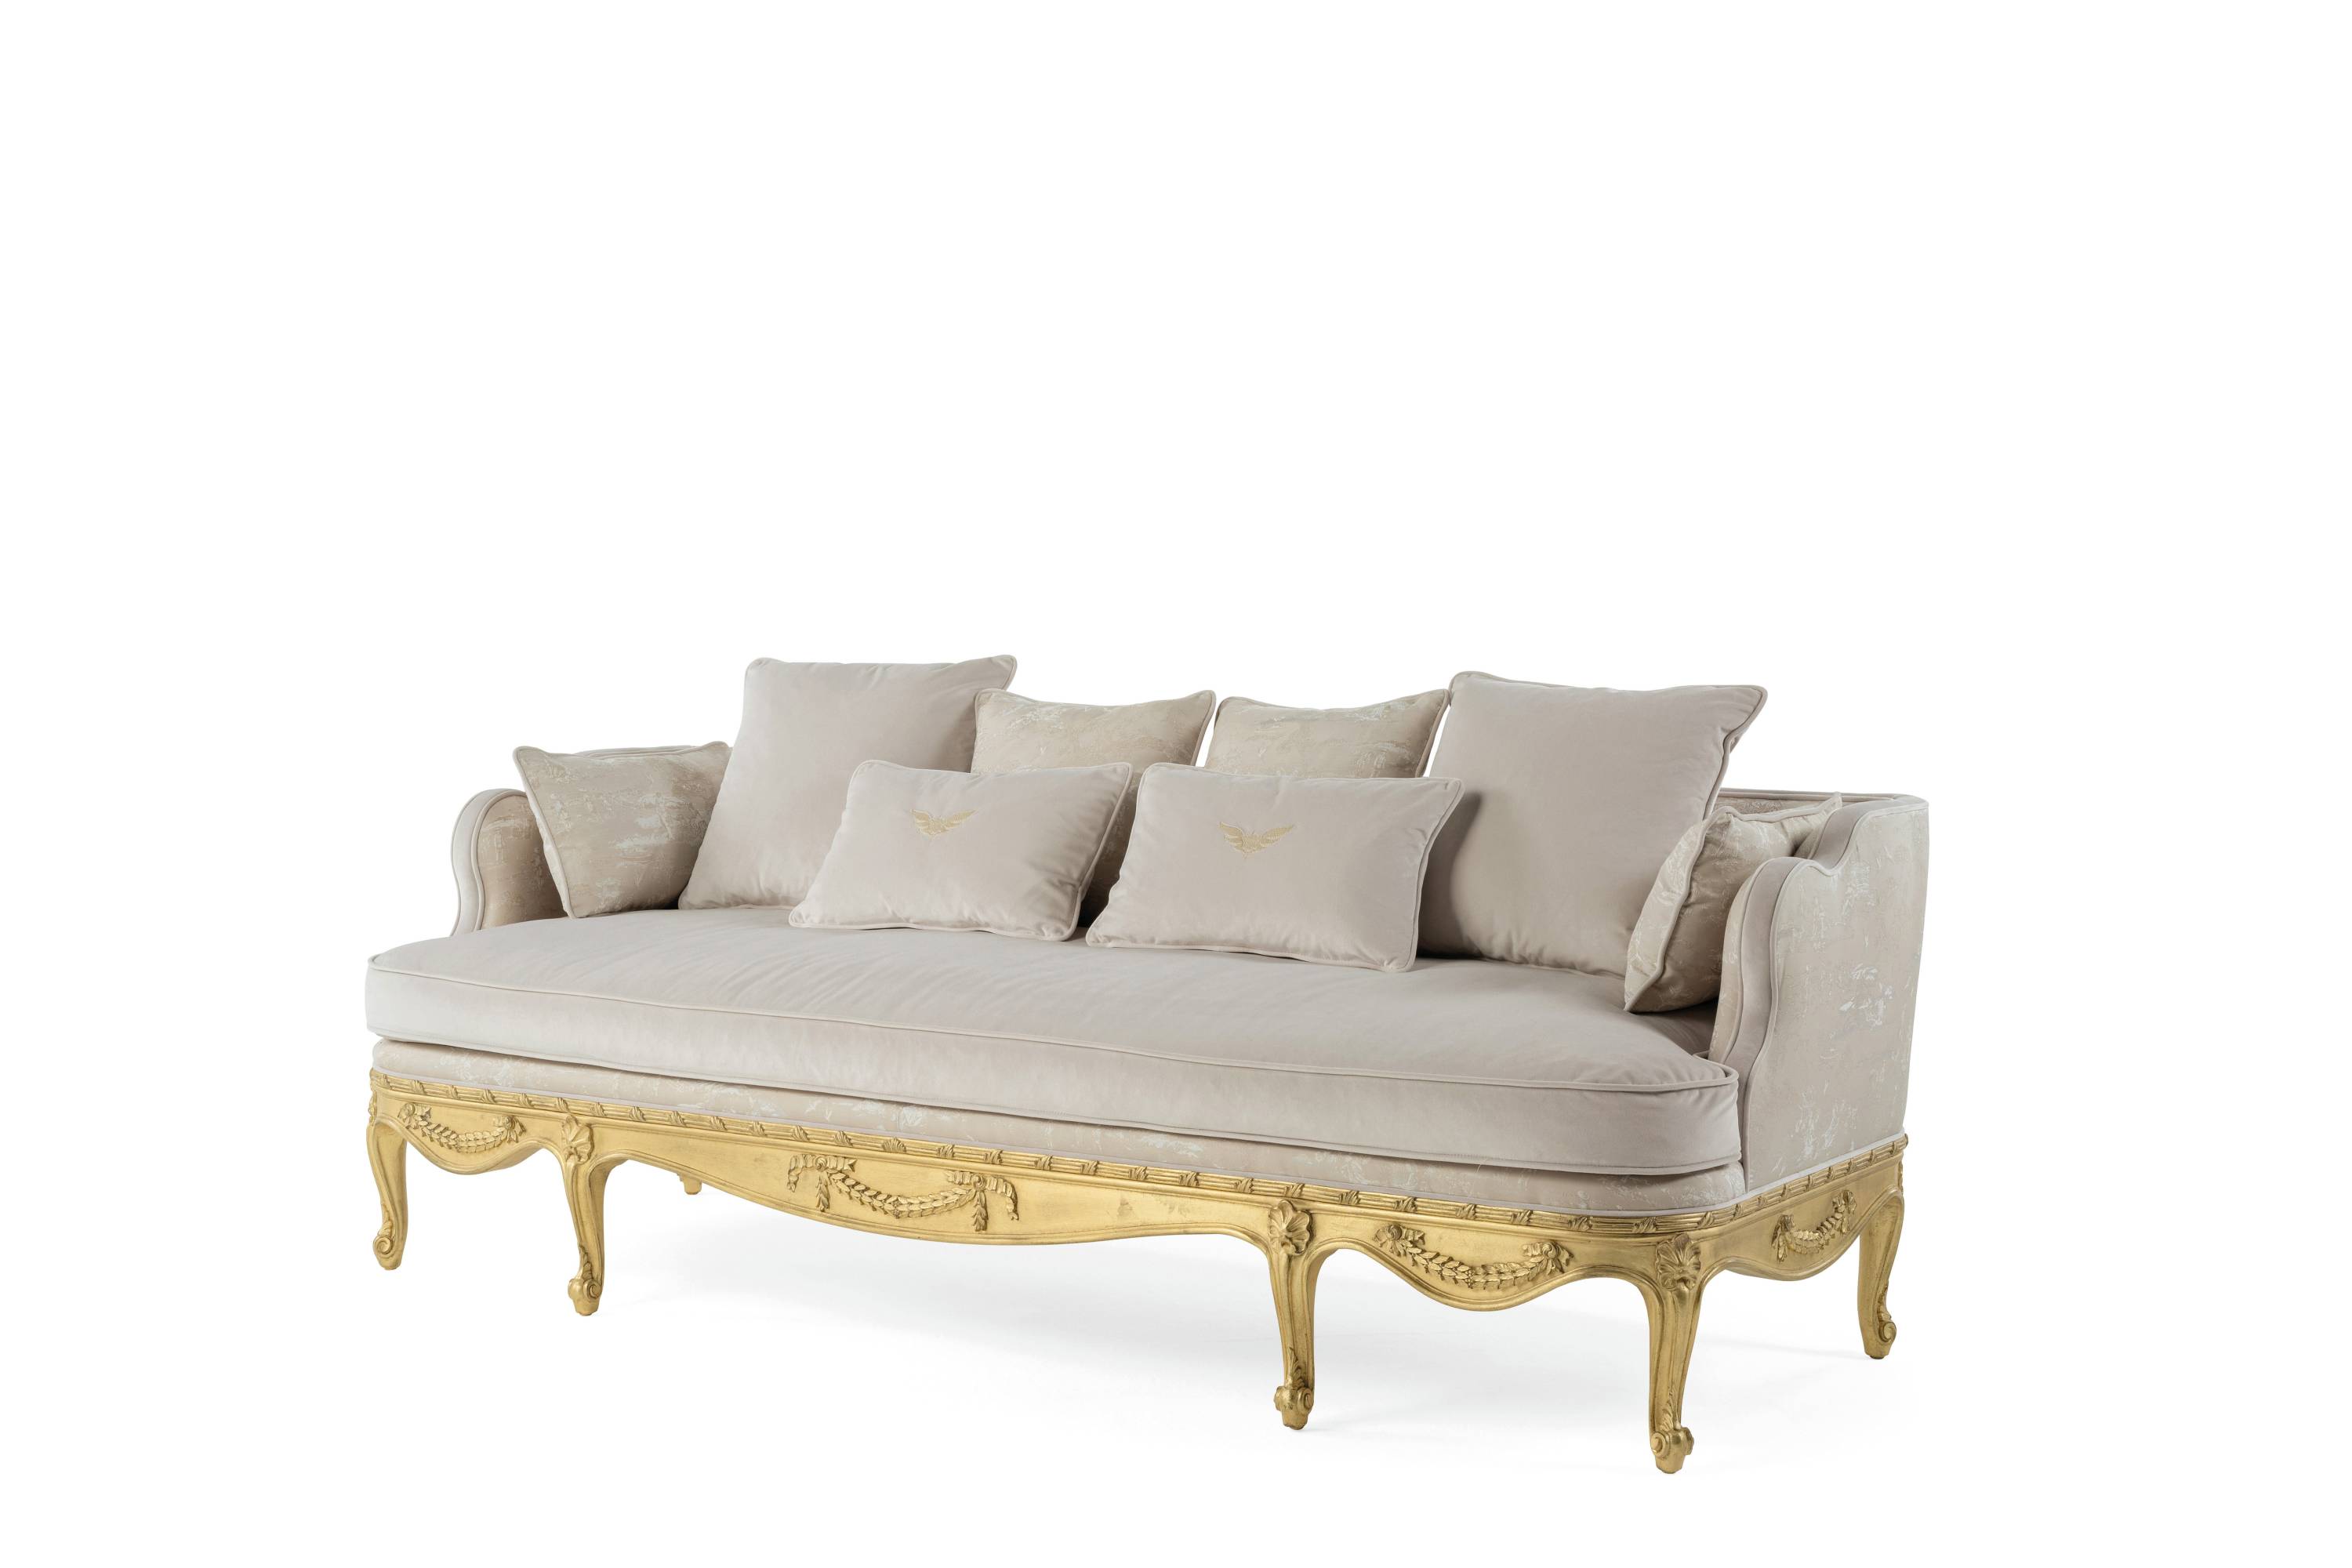 VERVEINE 2-seater sofa - 3-seater sofa – Transform your space with luxury Made in Italy classic sofas of Héritage collection.